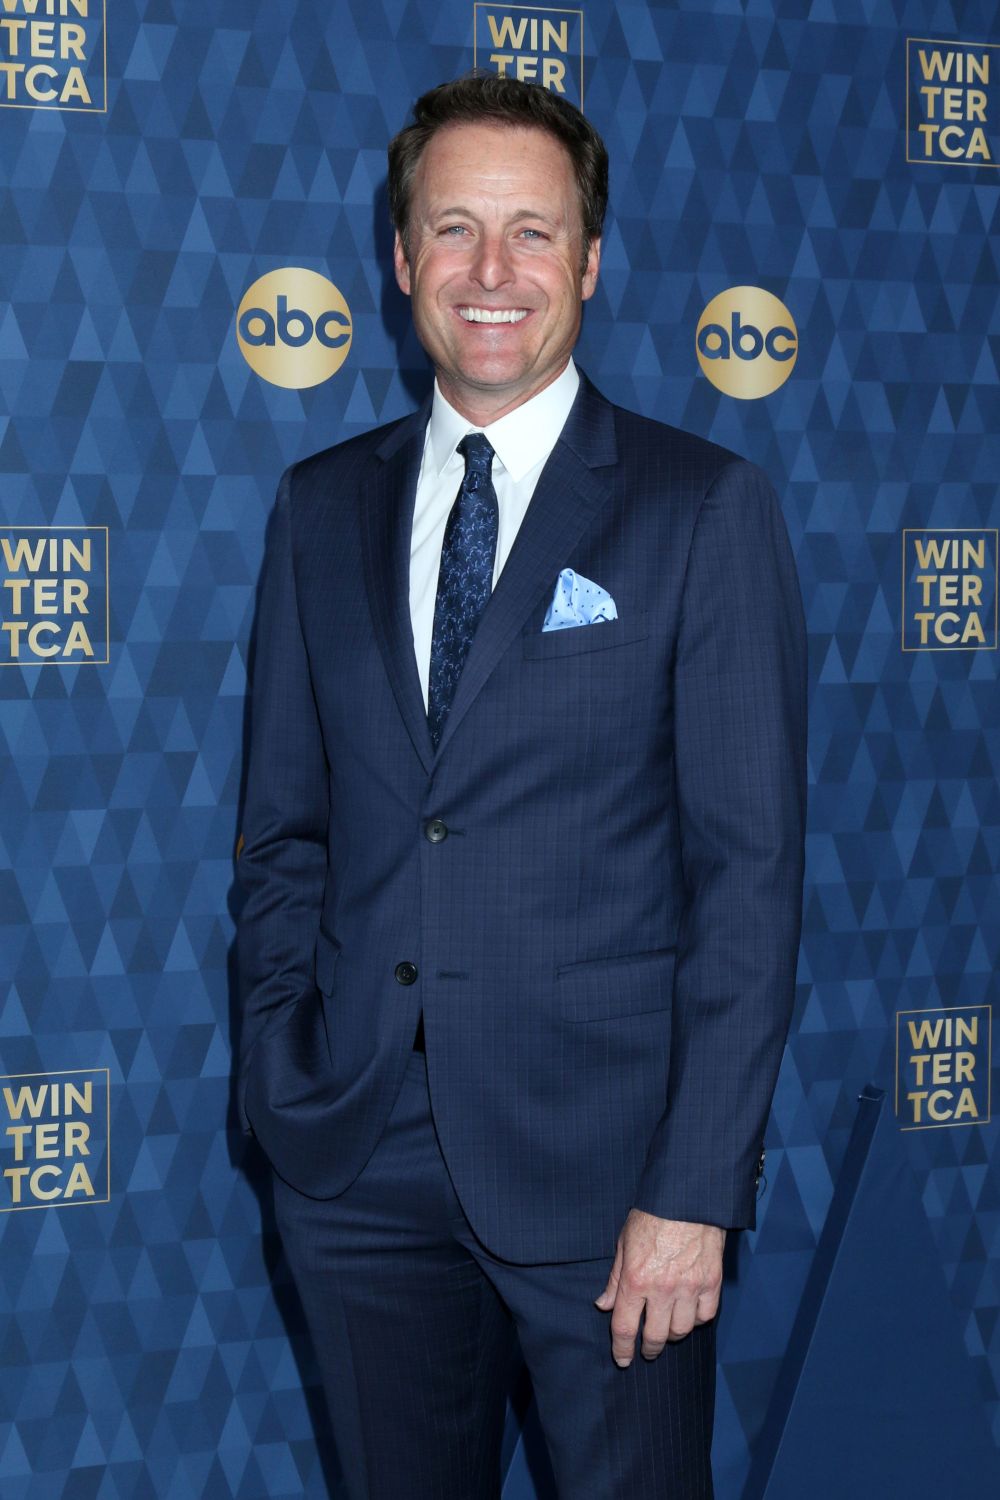 Bachelor’s Chris Harrison Hires High-Profile Lawyer Amid Racism Controversy, Hosting Step-Down